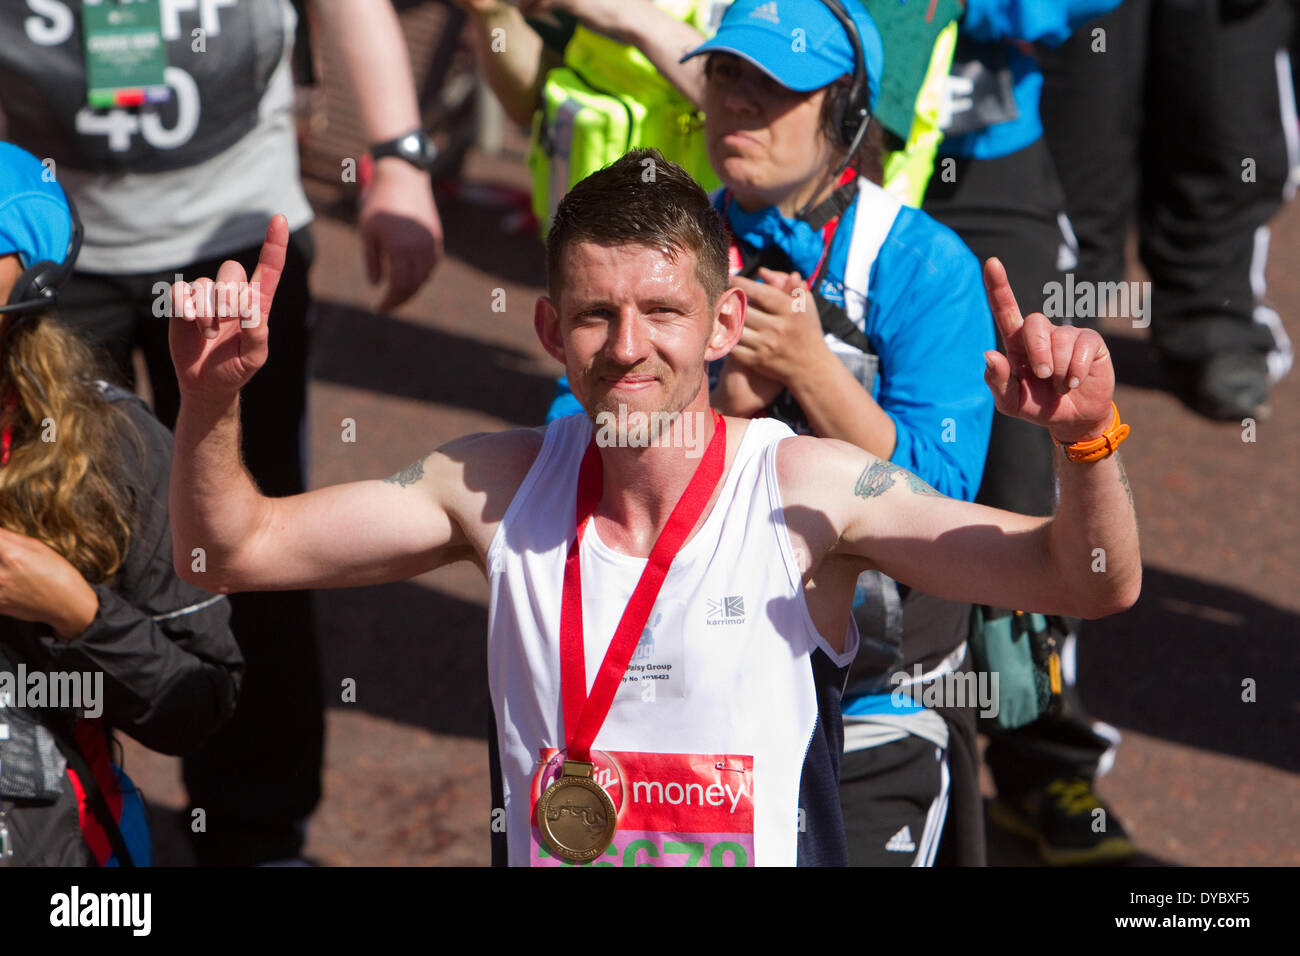 London,UK,13th April 2014,A male runner after finishing the London Marathon 201 Credit: Keith Larby/Alamy Live News Stock Photo